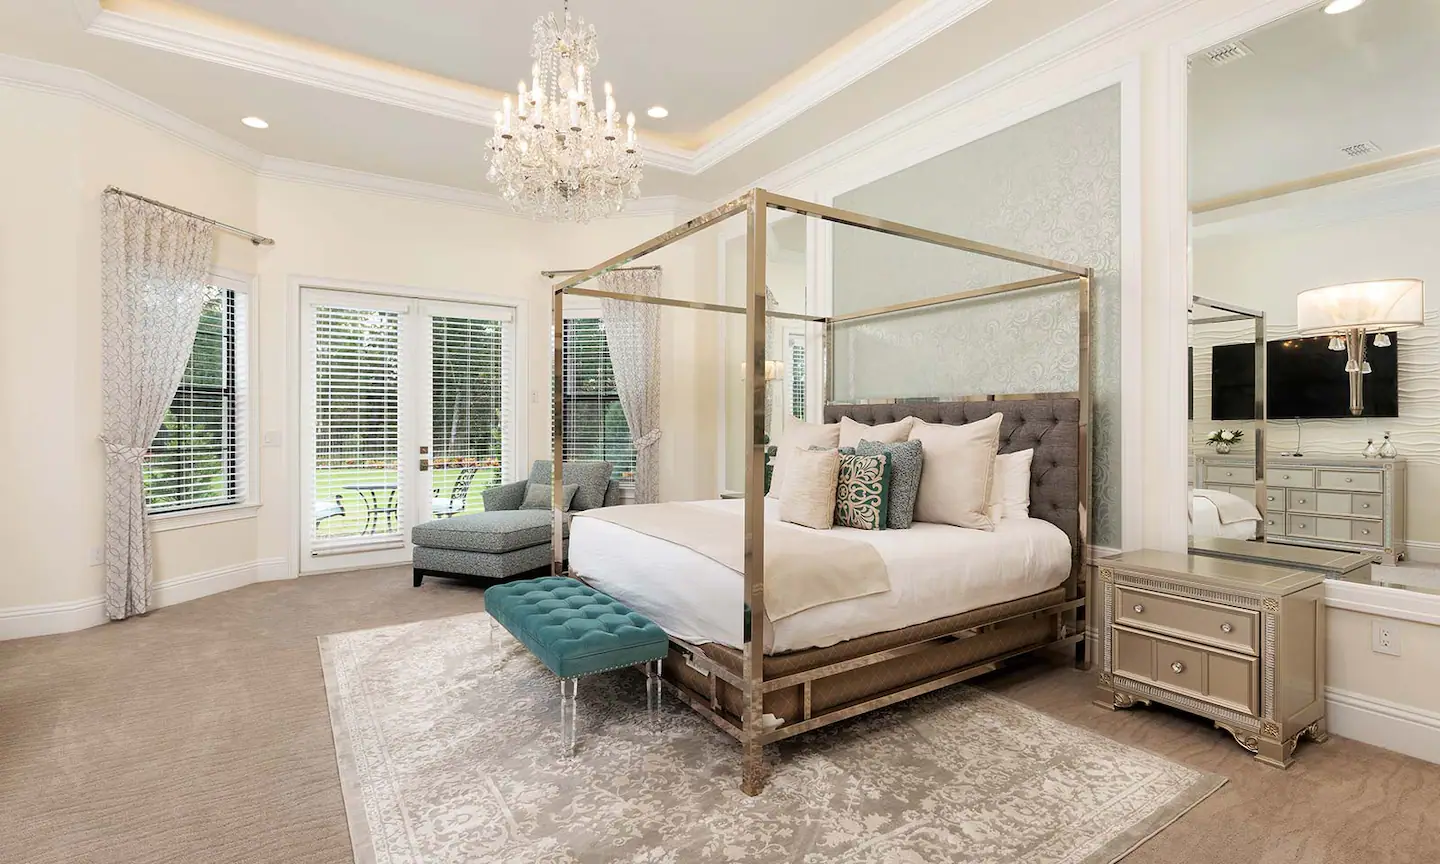 A bedroom with lots of space and would make you feel like a royalty.